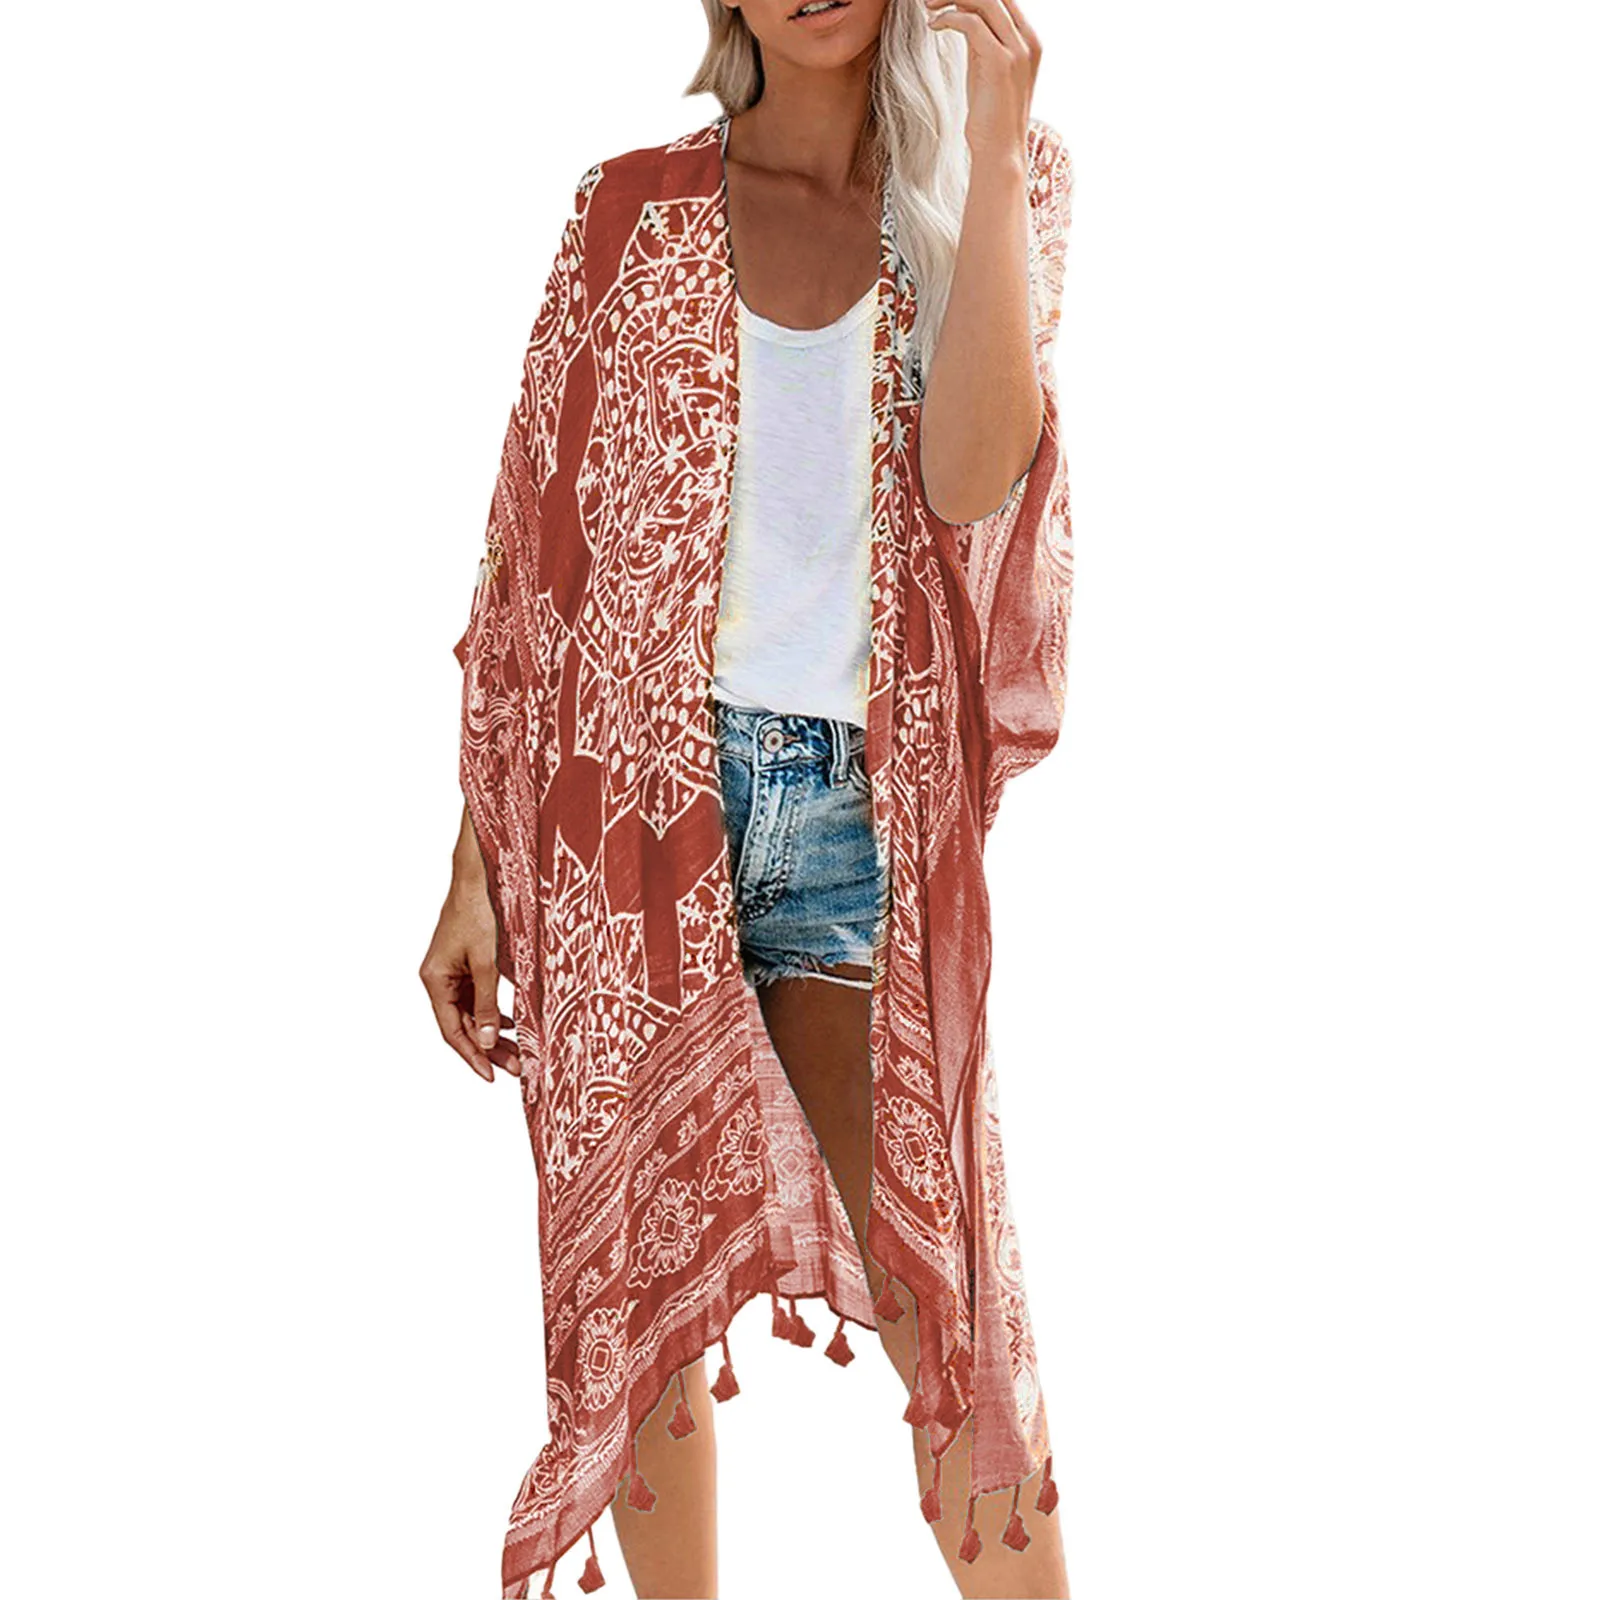 Bohemian Vintage Floral Print Woman Long Kimono Shirt Ethnic Loose Cardigan Tops Holiday Sunscreen Blouses Women Outer Cover bathing suit wrap cover up